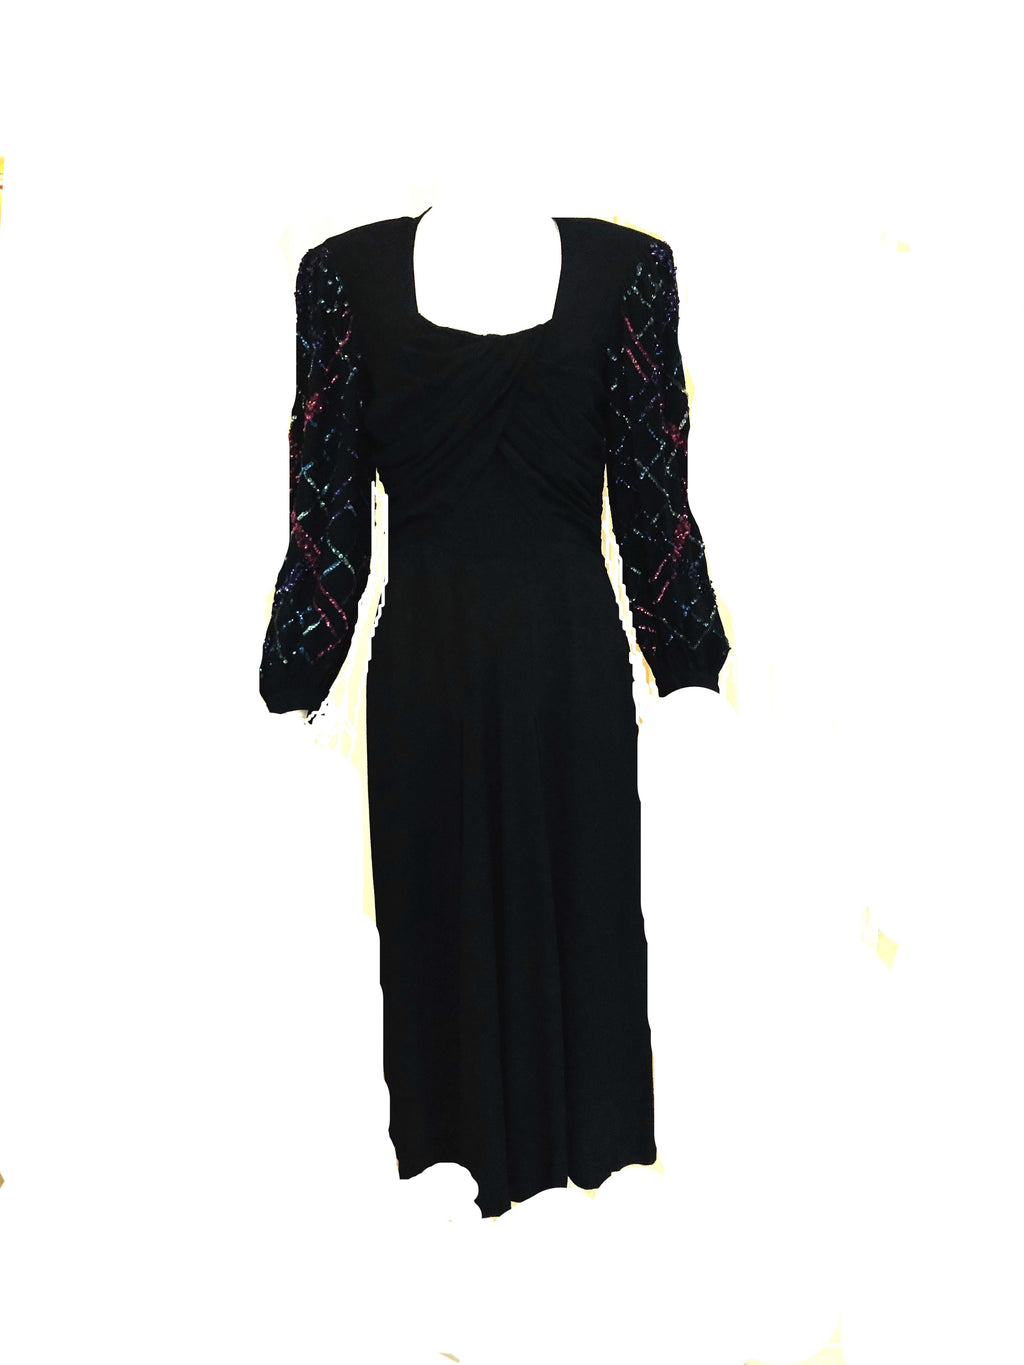 40s Black Crepe Long Sleeve Dress  with Sequin Detailed Sleeves and Draped Bodice FRONT 1 of 4